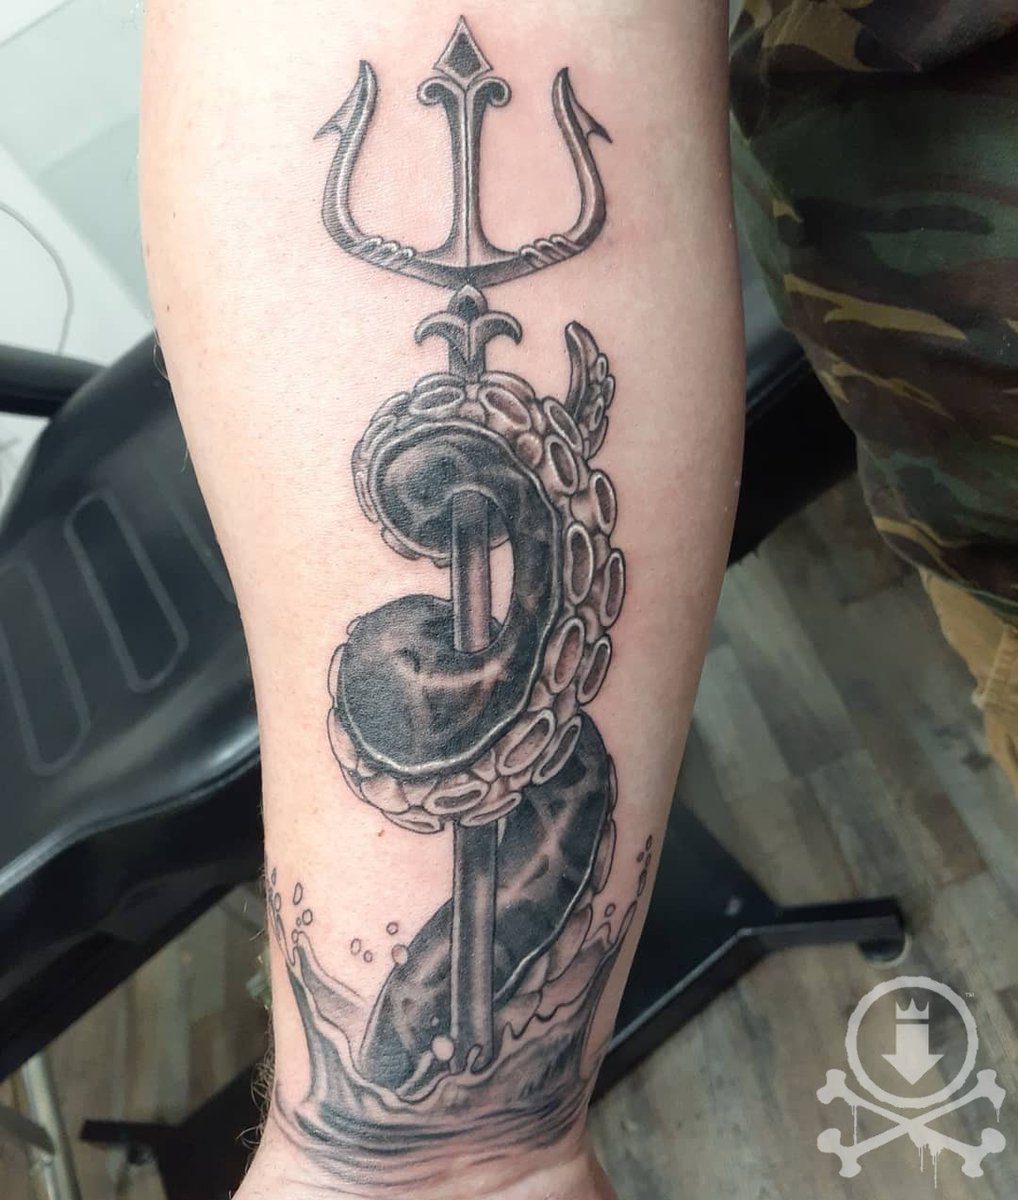 A trident with a snake, A significance of Lord Shiva. The uniqueness and  customisation of the tattoo piece says it all. Minimal detailing... |  Instagram